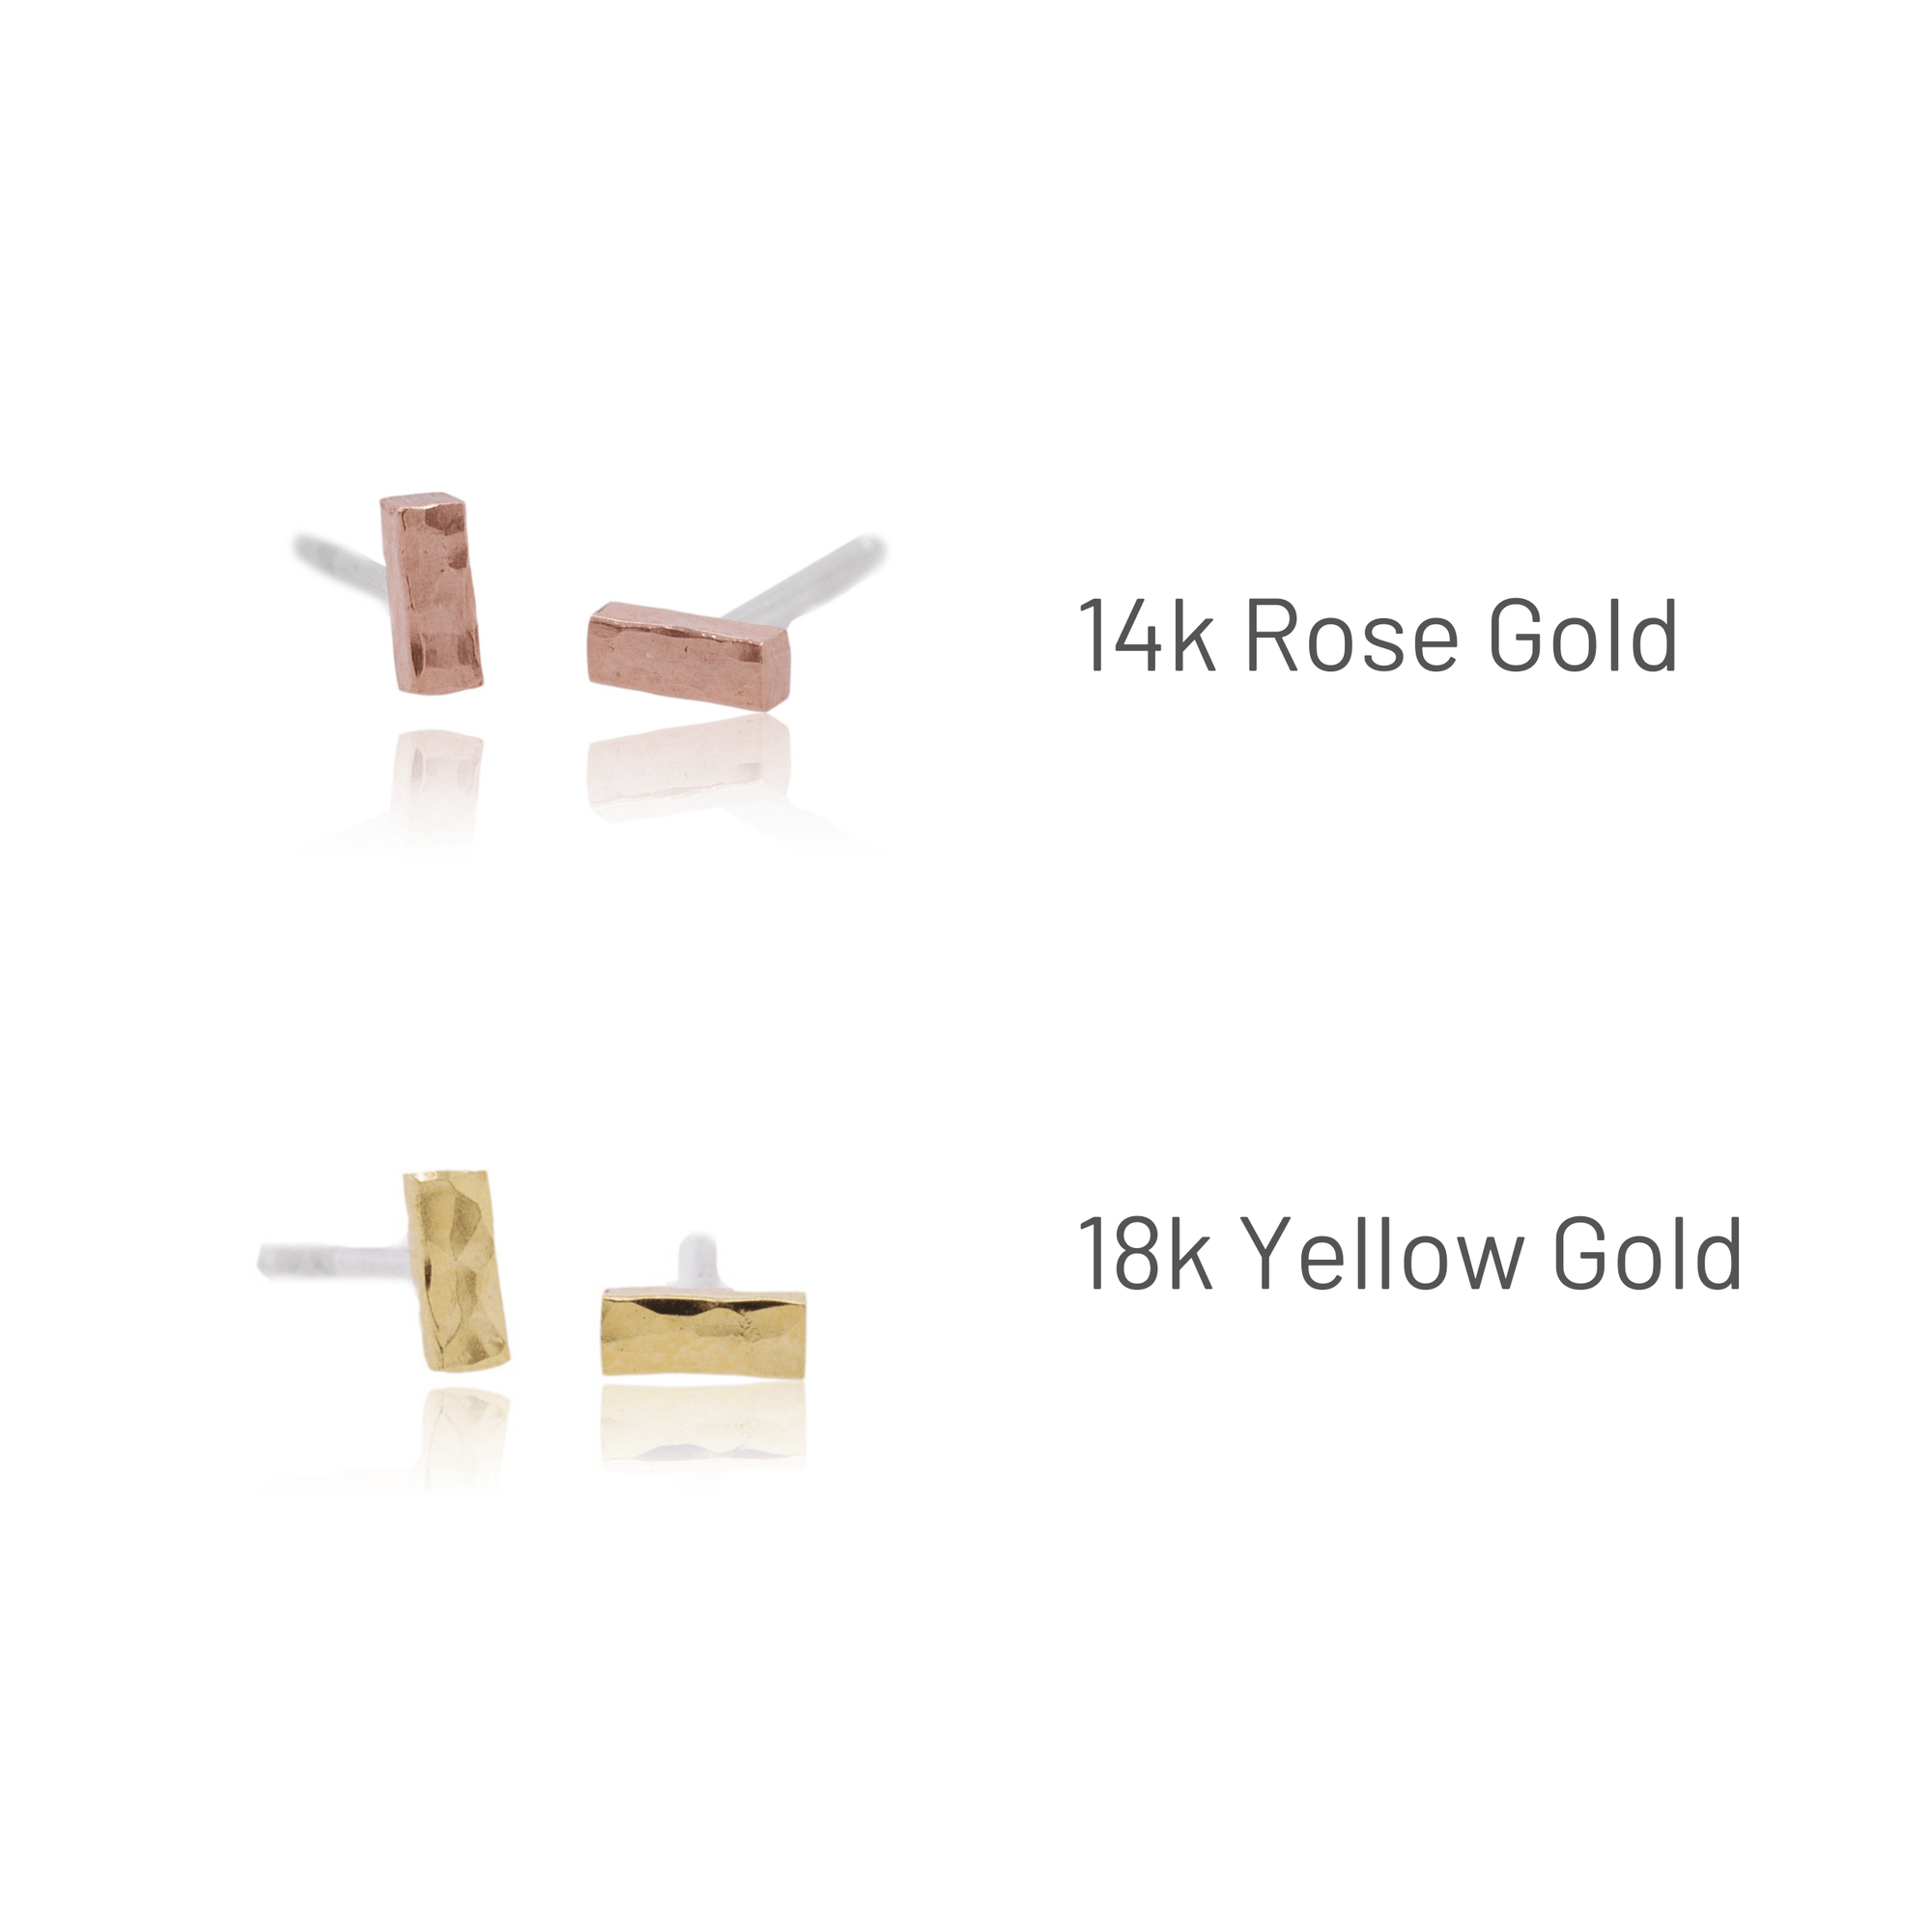 Handmade hammered gold bar studs in 14k rose gold or 18k yellow gold.